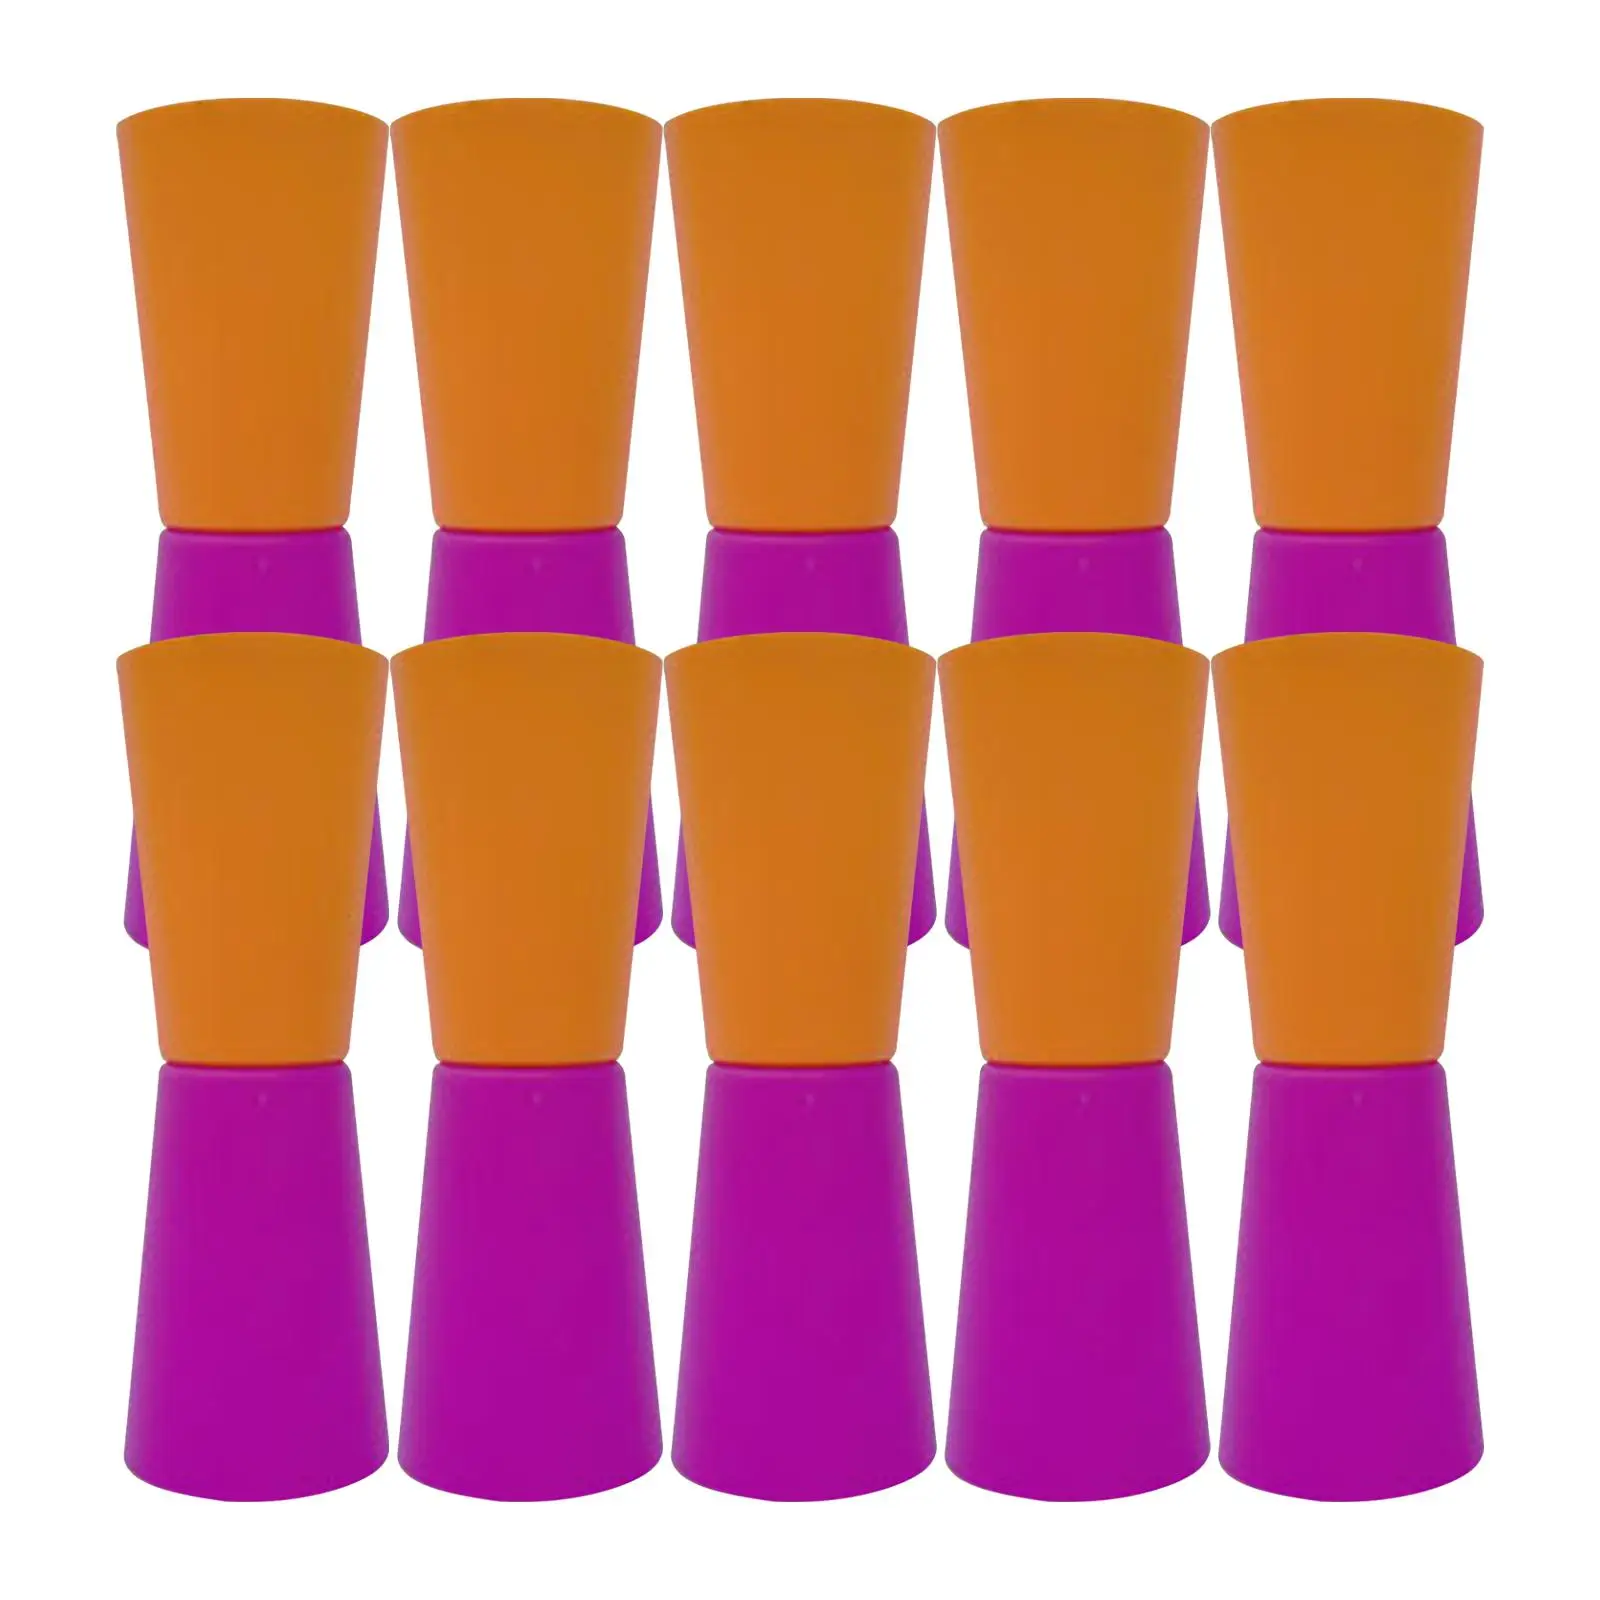 10Pcs Flip Cups Speed Agility Training Sport Equipment Reversed Cups Aid for Kindergarten Gym Rugby Activity Festive with Net